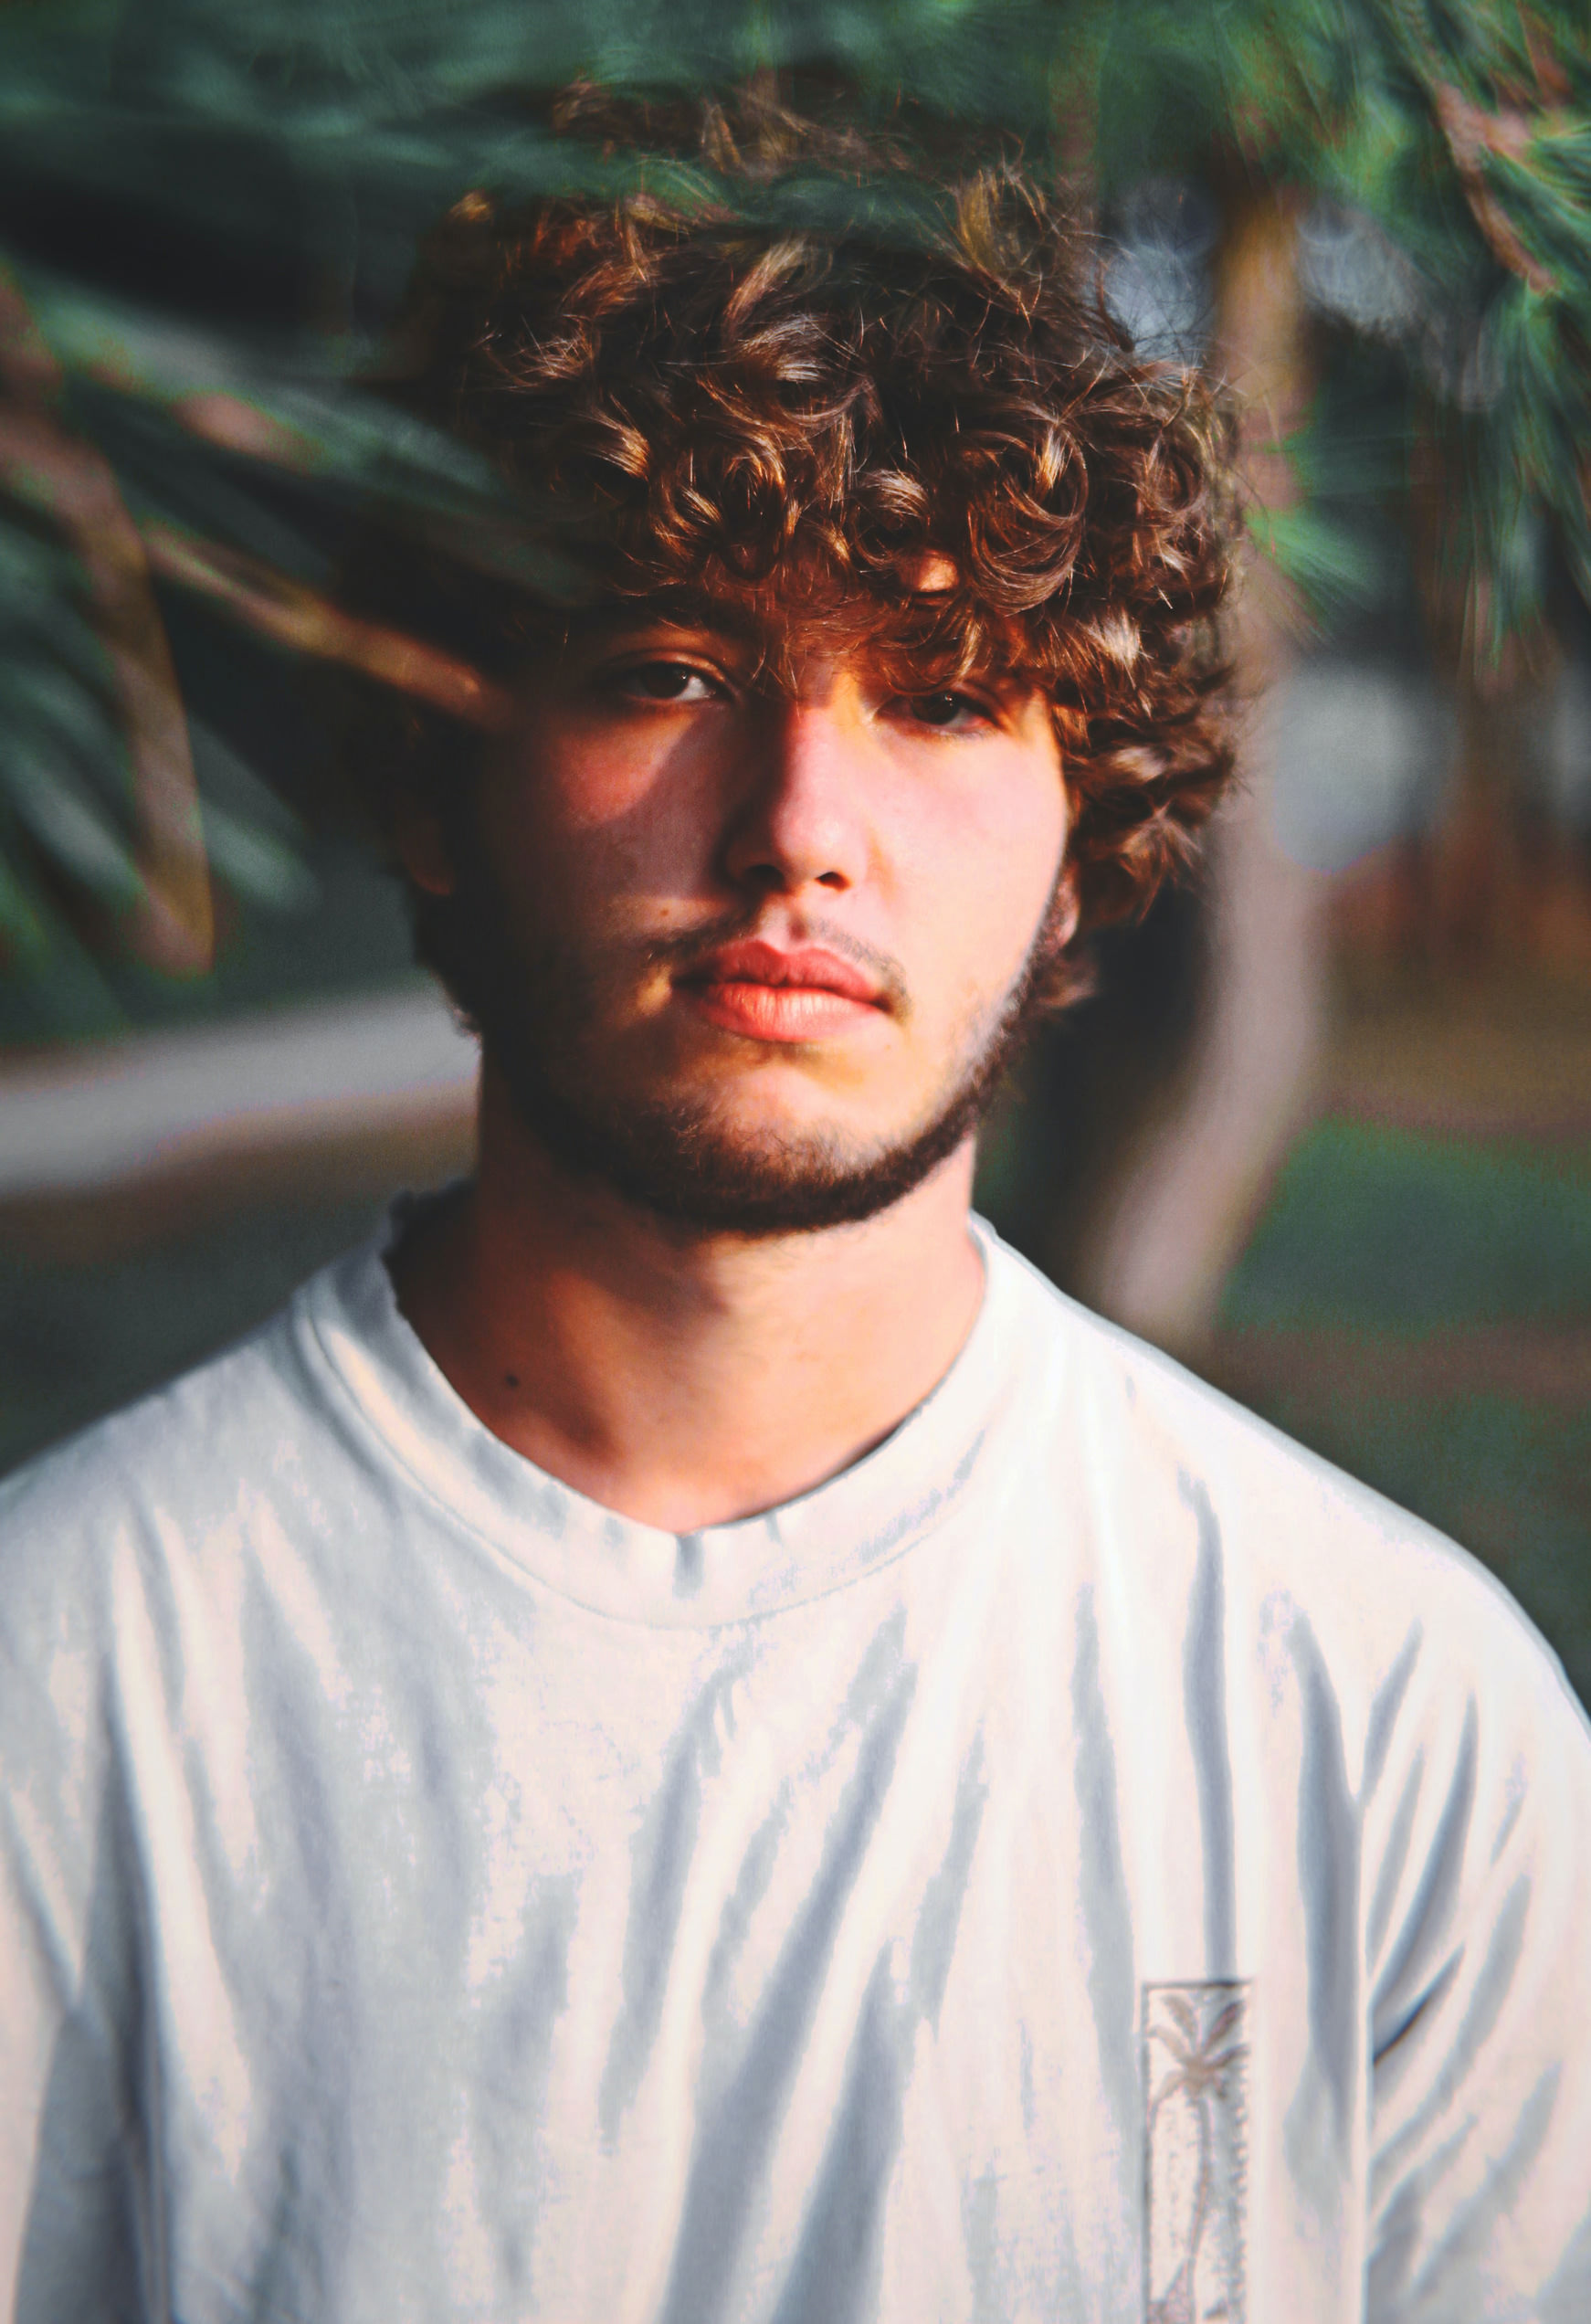 profile shot of young man with curly hair